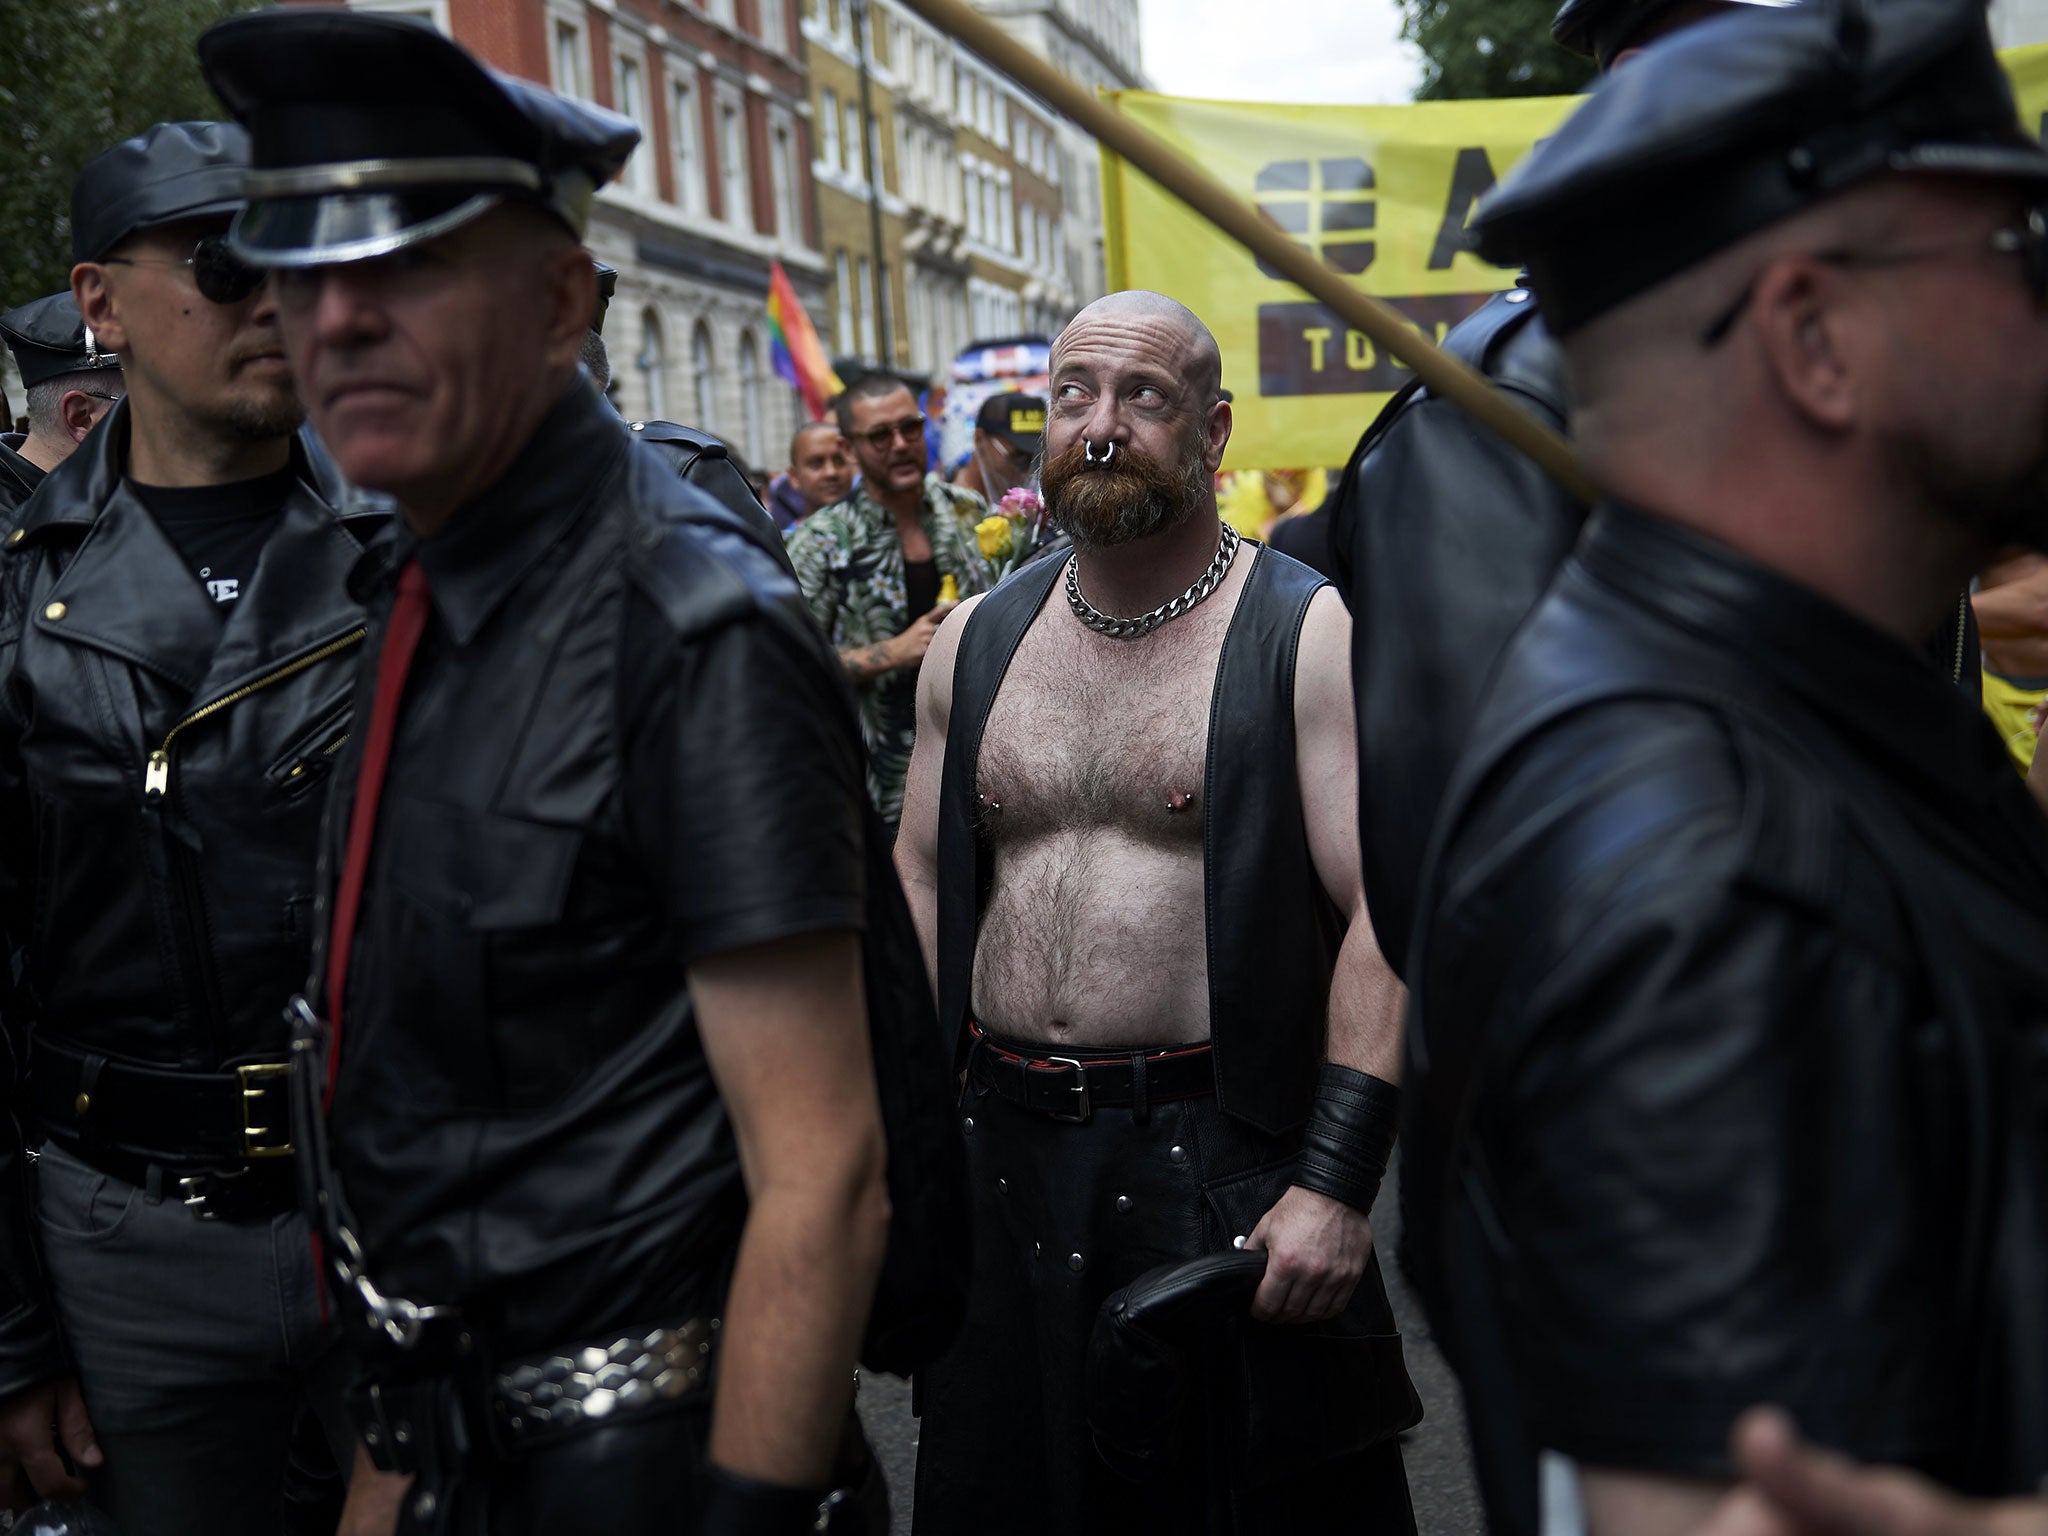 People attend the London Pride festival